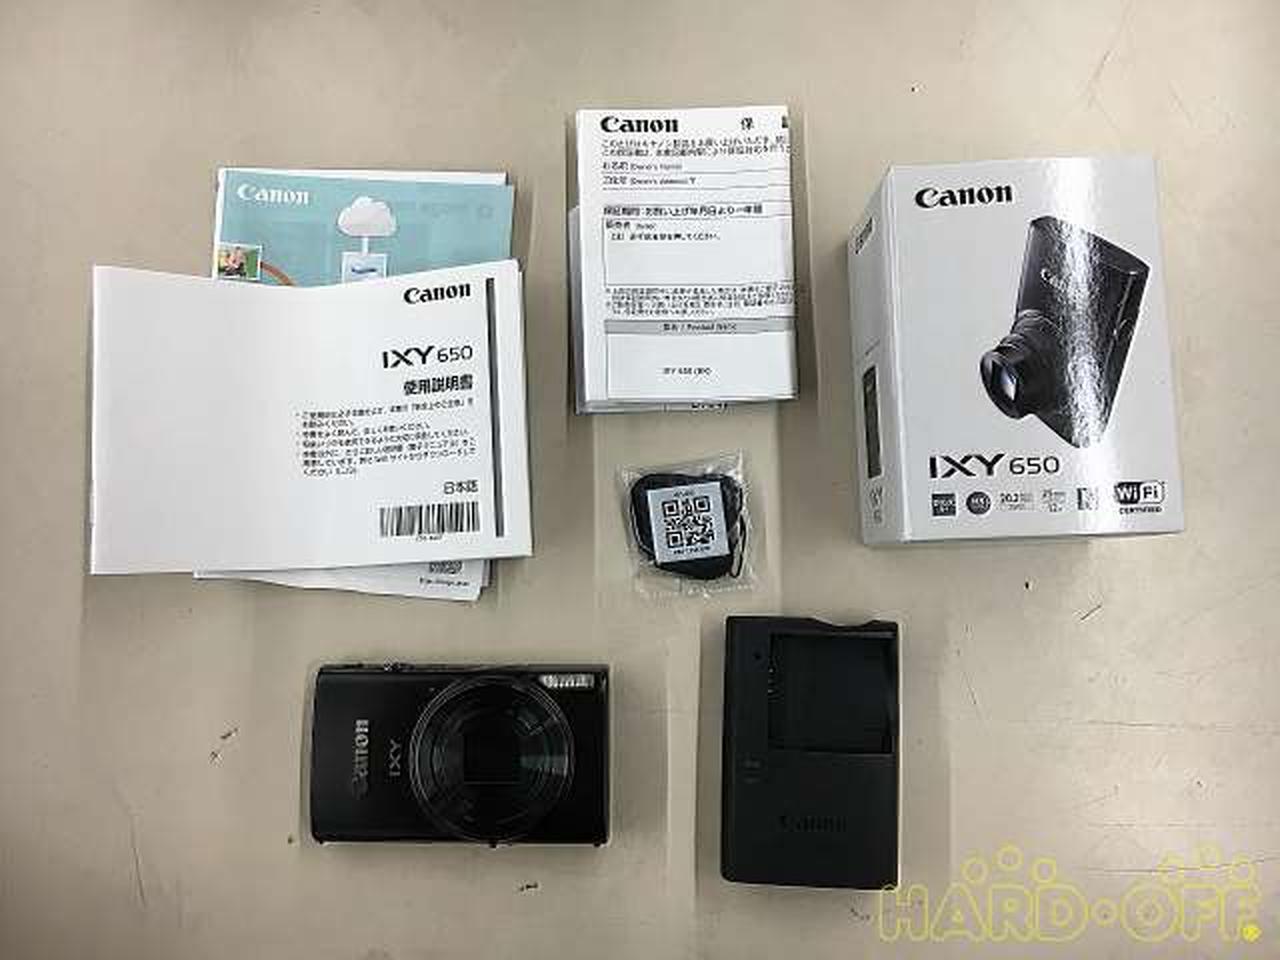 Canon Compact Digital Camera Model number: IXY650 Used in Japan